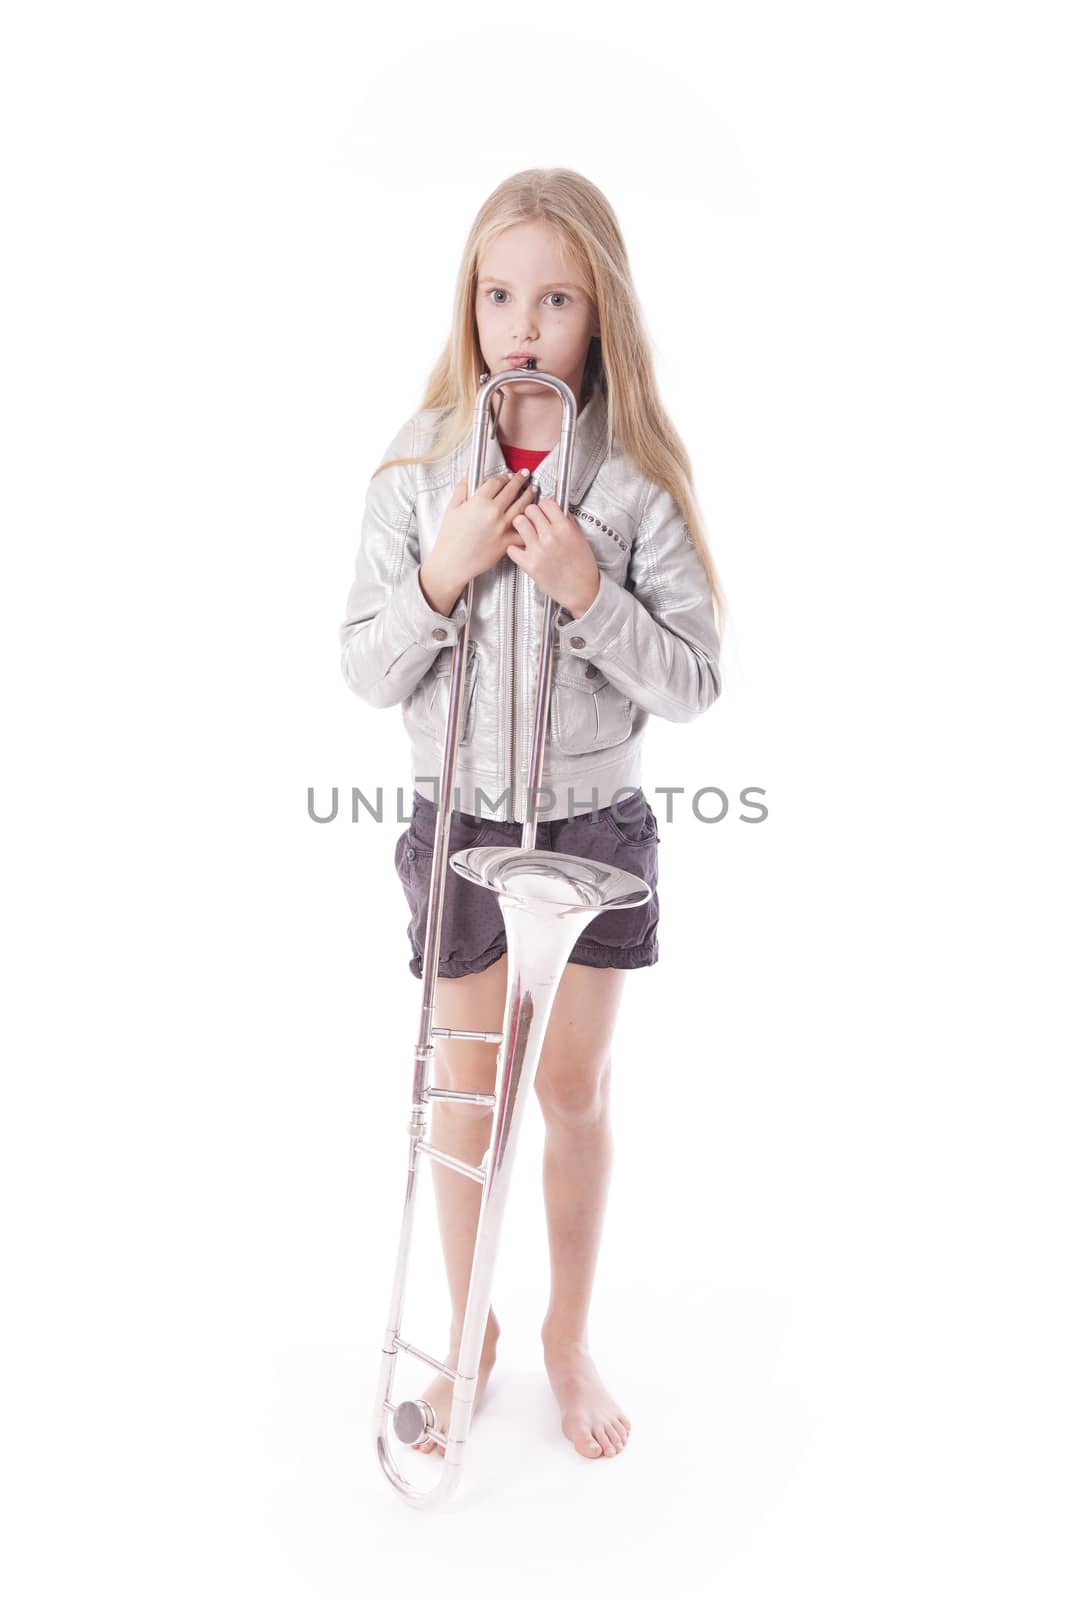 young girl in silver jacket standing with her trombone in studio against white background